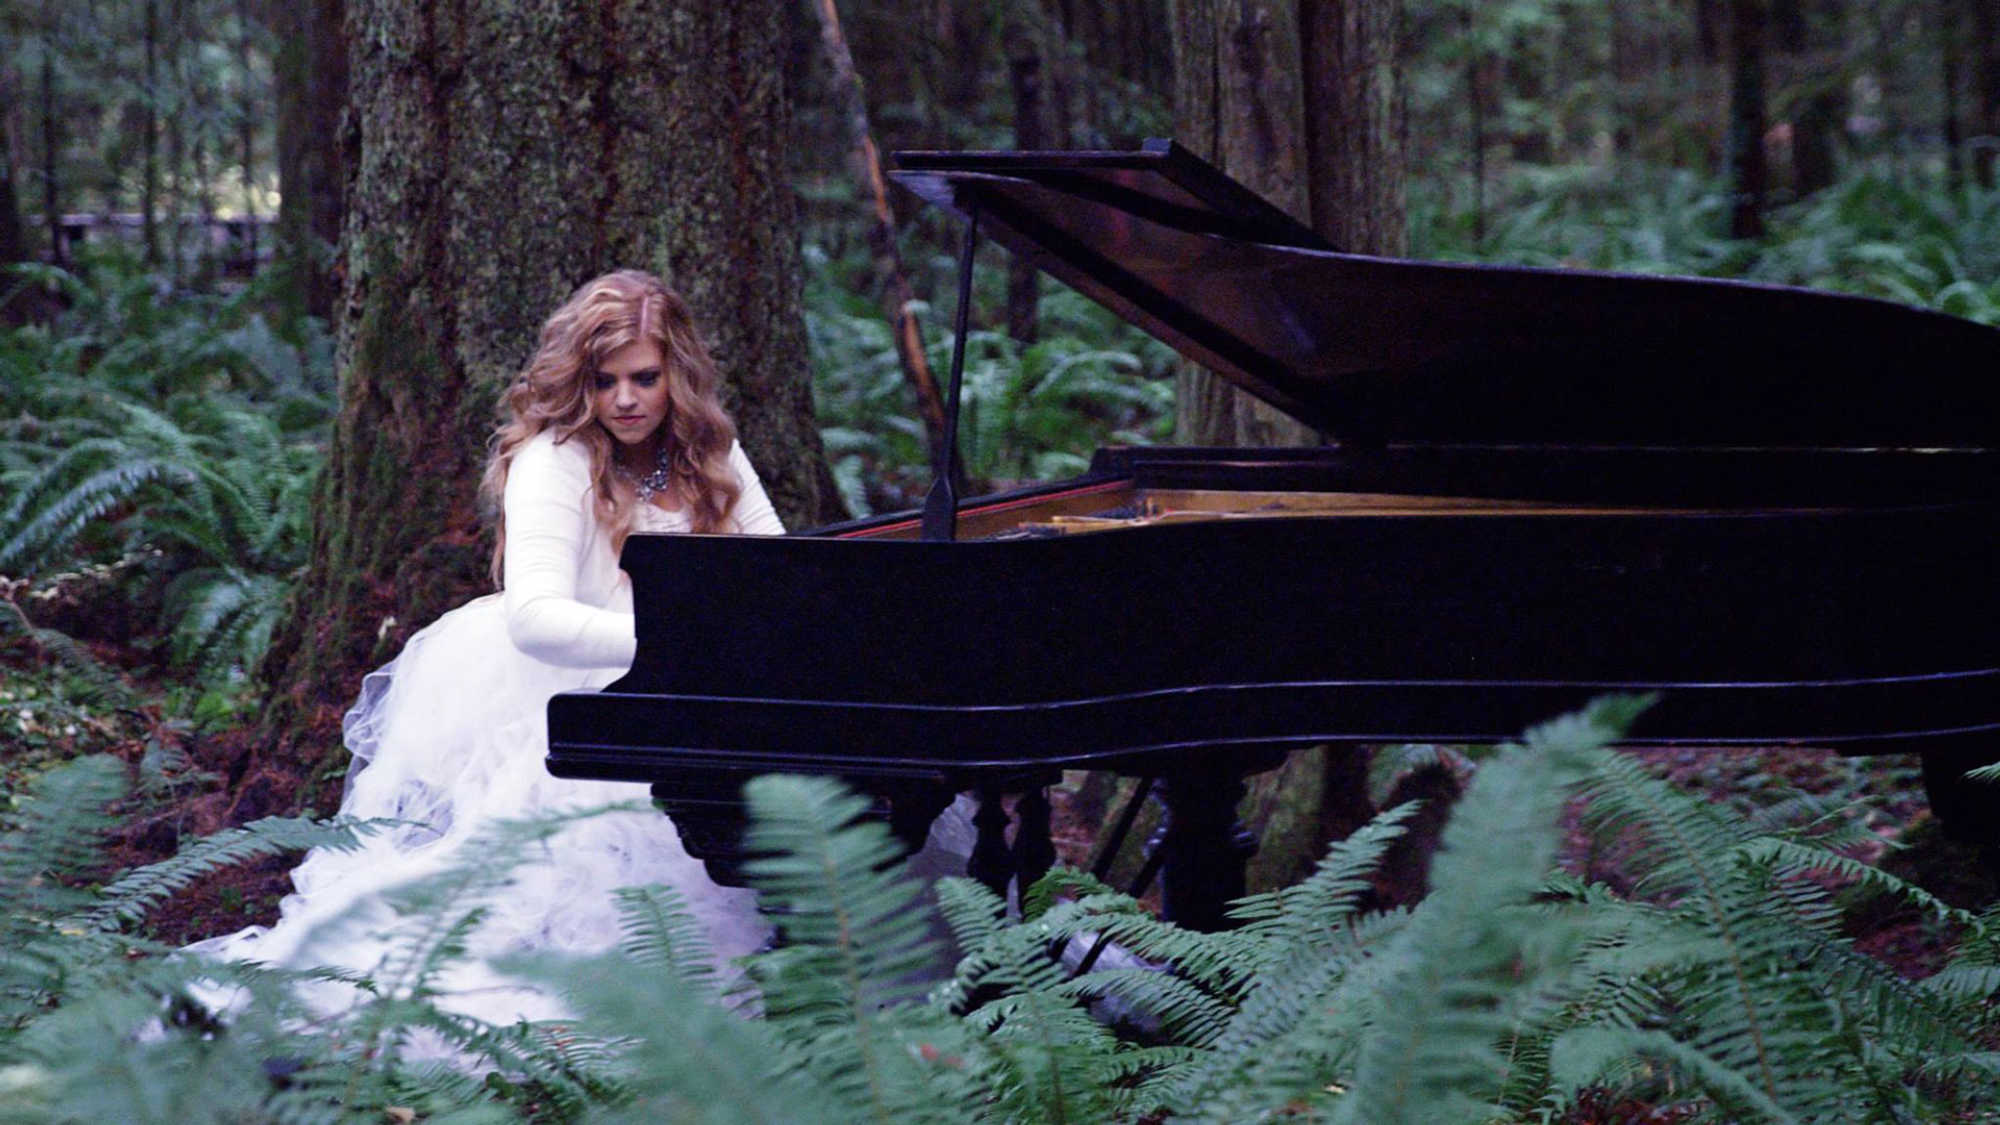 Jennifer Thomas, pianist, films a music video playing a piano in the forest.